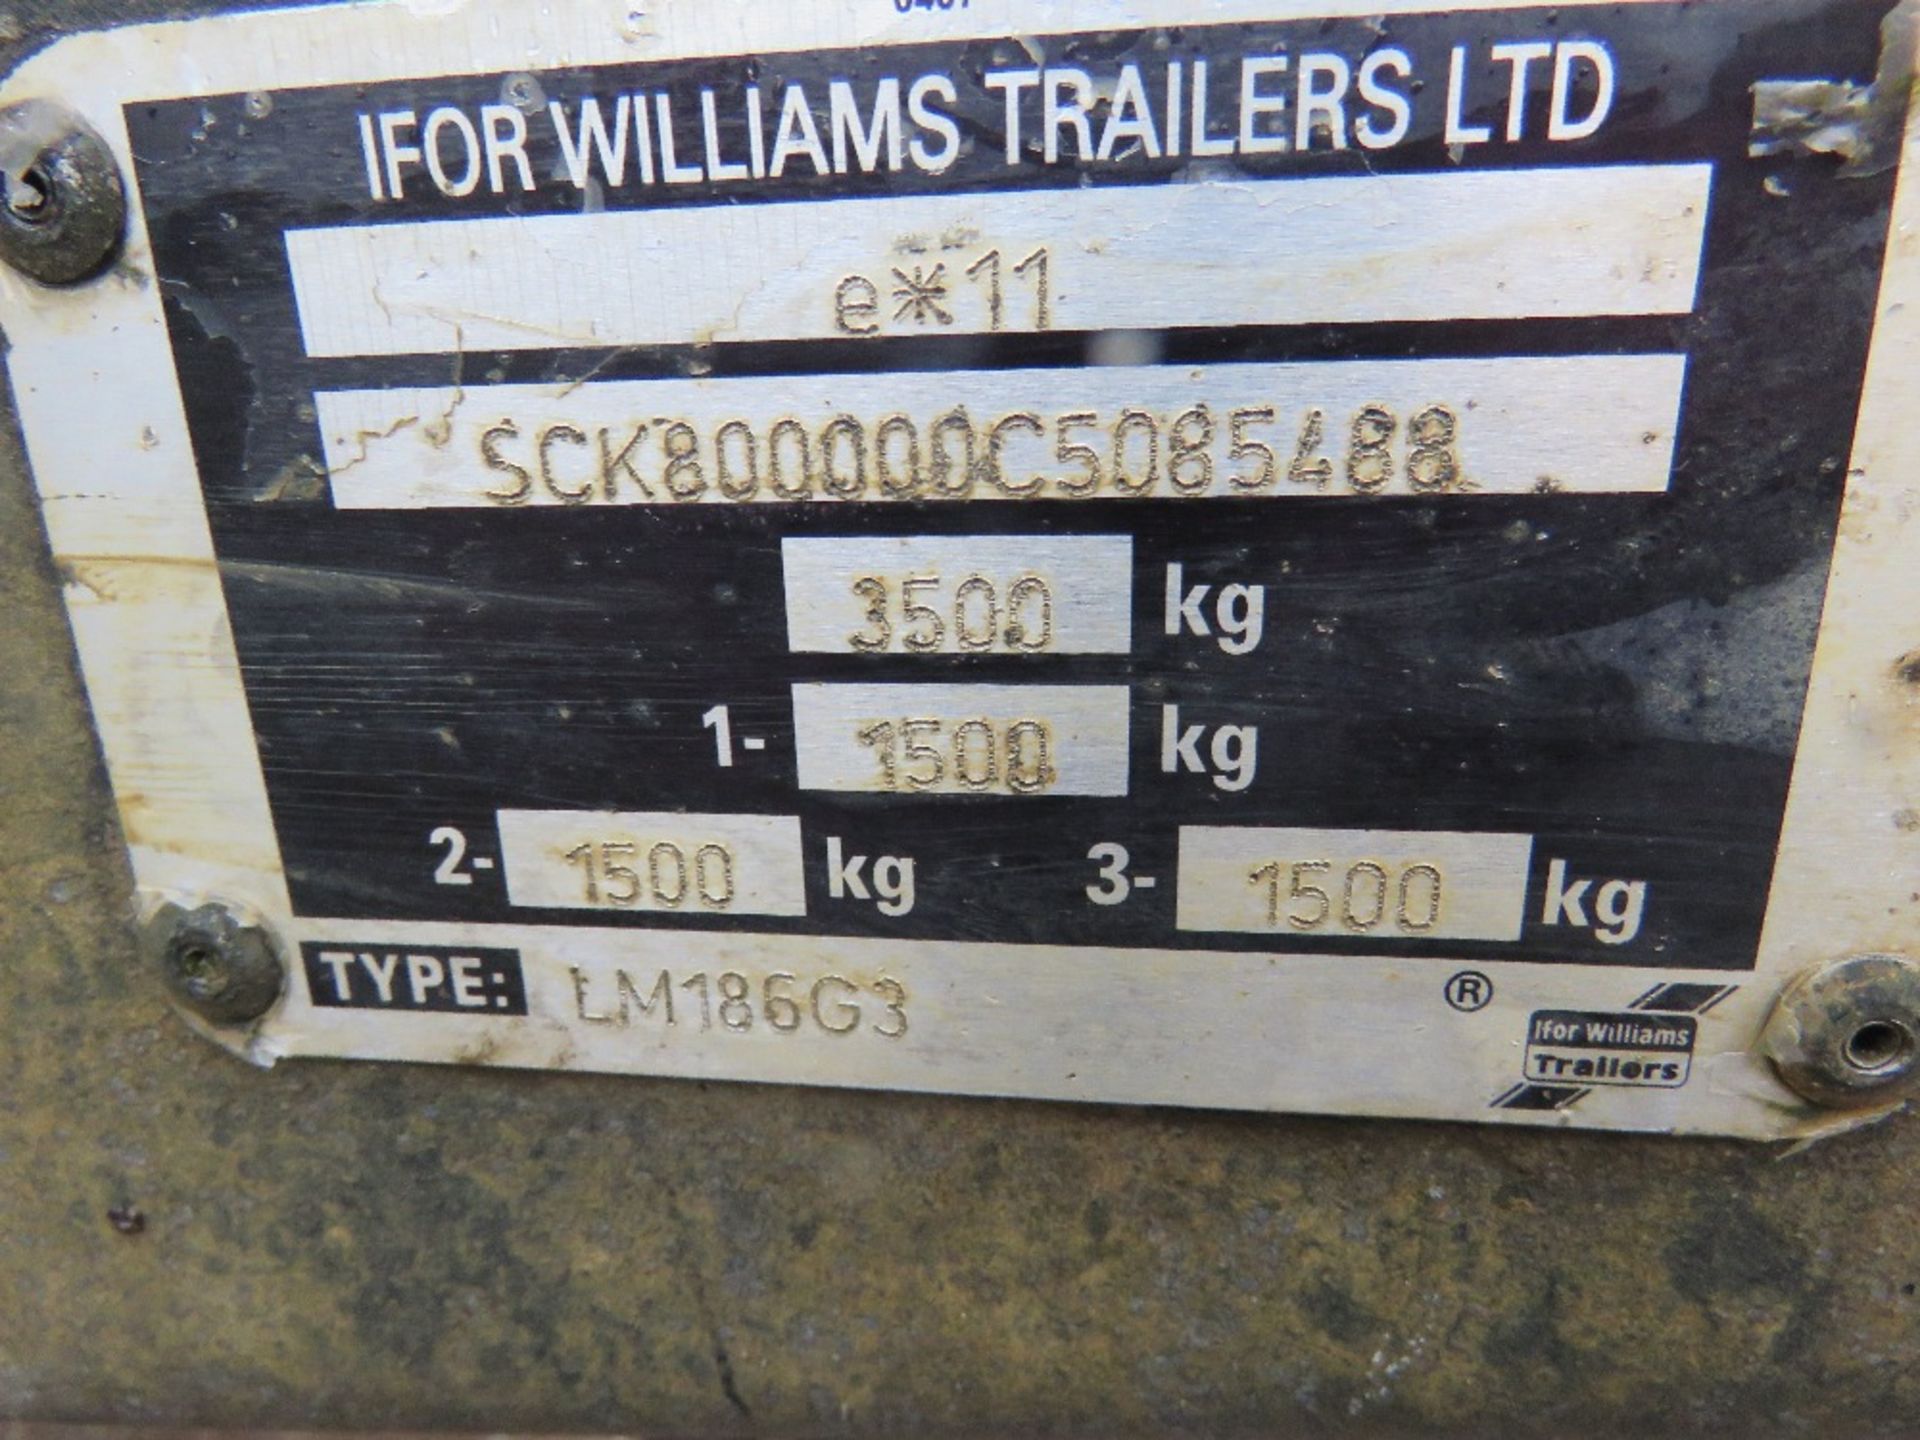 IFOR WILLIAMS LM186G3 TRIAXLED PLANT TRAILER. 18FT LENGTH X 6FT WIDTH WITH SIDES. SN:SCK800000C50854 - Image 13 of 13